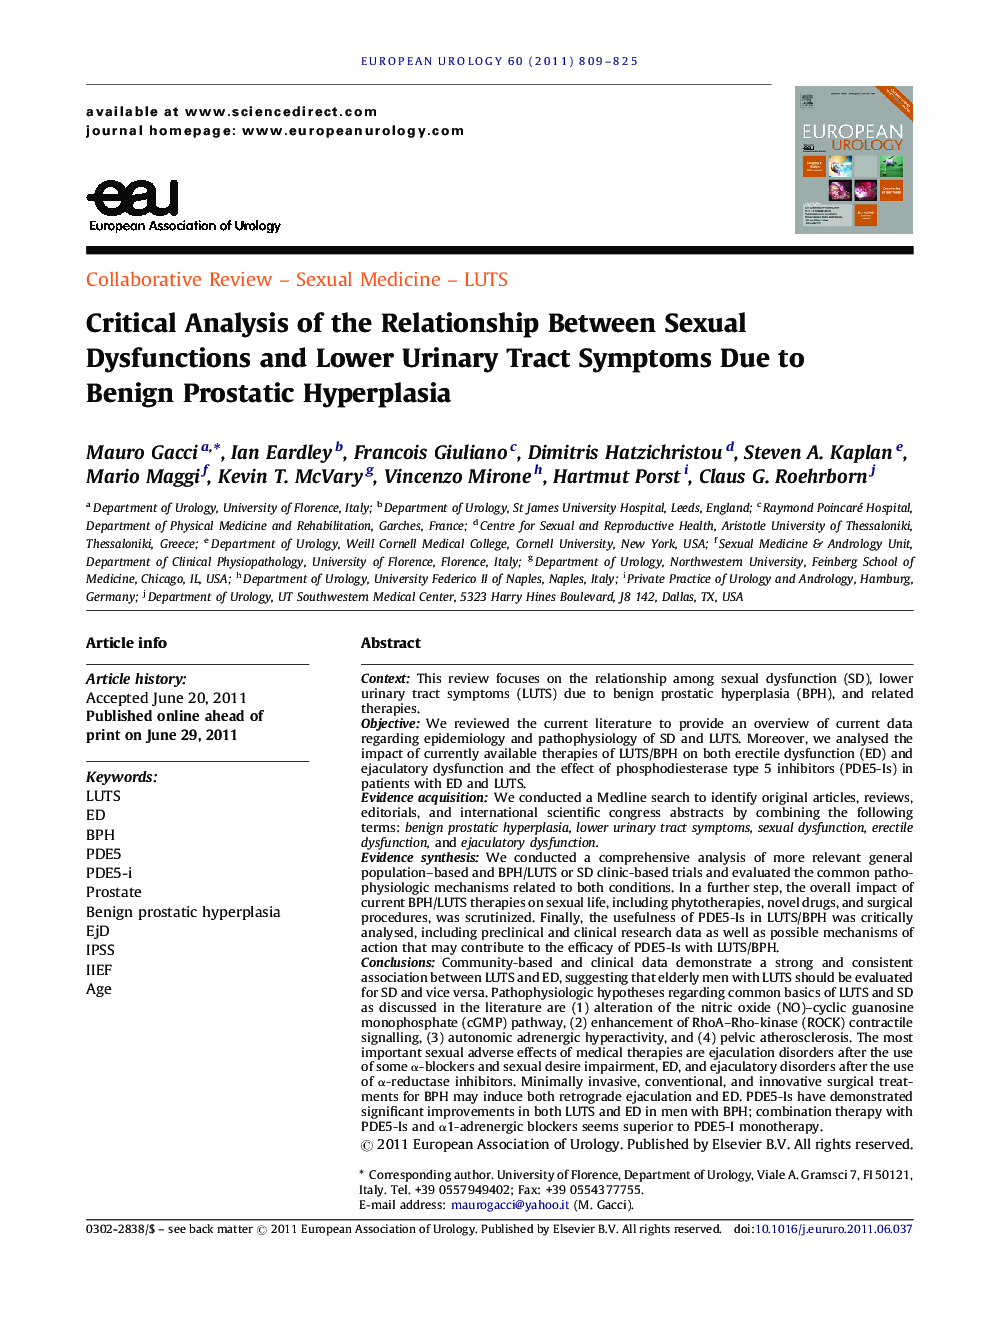 Critical Analysis of the Relationship Between Sexual Dysfunctions and Lower Urinary Tract Symptoms Due to Benign Prostatic Hyperplasia